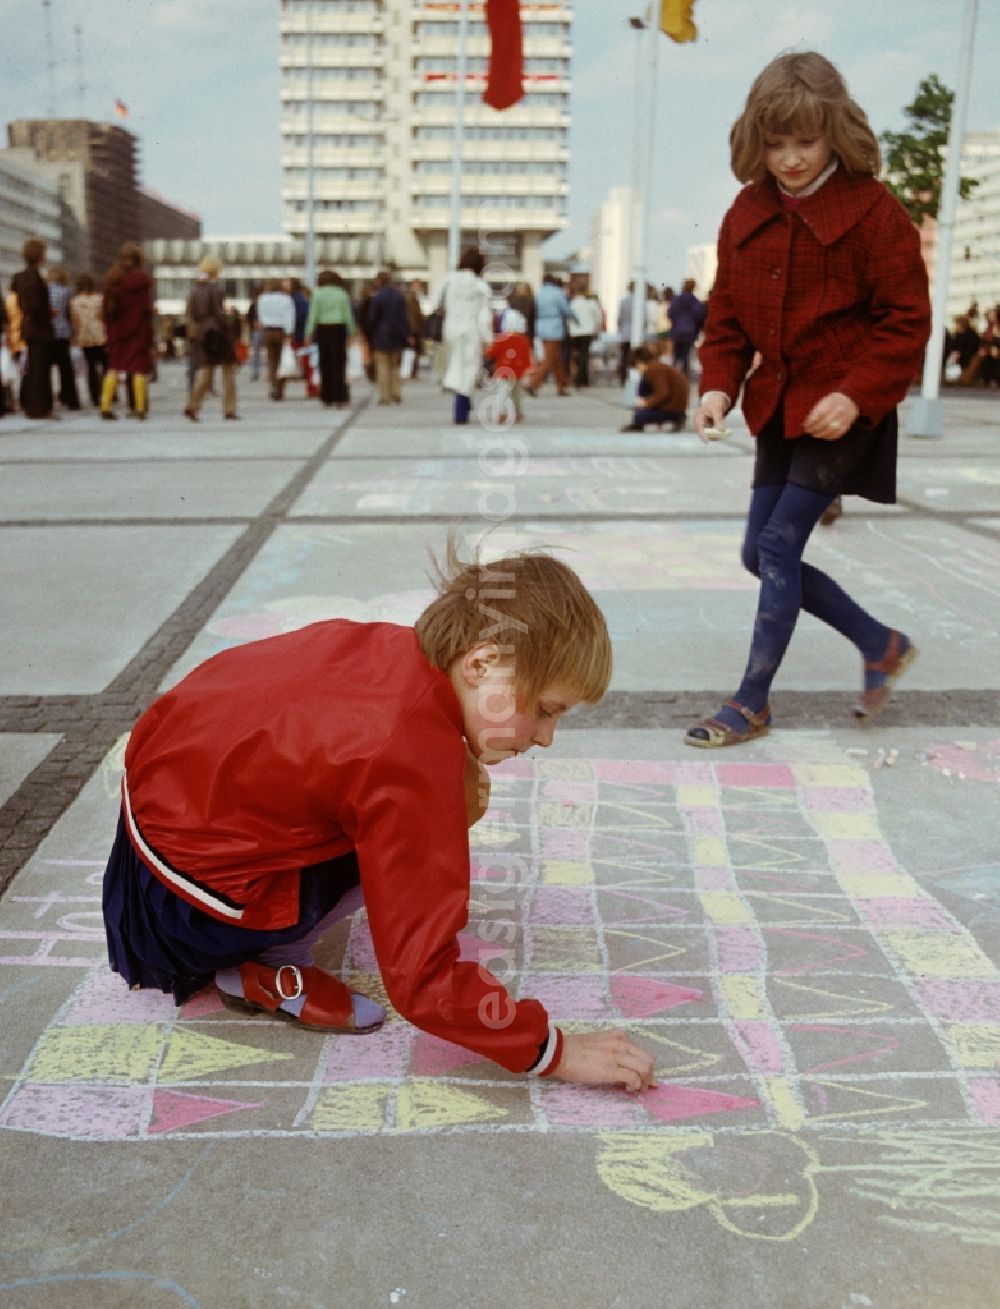 GDR picture archive: Berlin - Two girls paint with chalk at the drawing competition for children on the occasion of the traditional celebrations on 1 May at Alexanderplatz in Berlin Mitte, the former capital of the GDR, German Democratic Republic